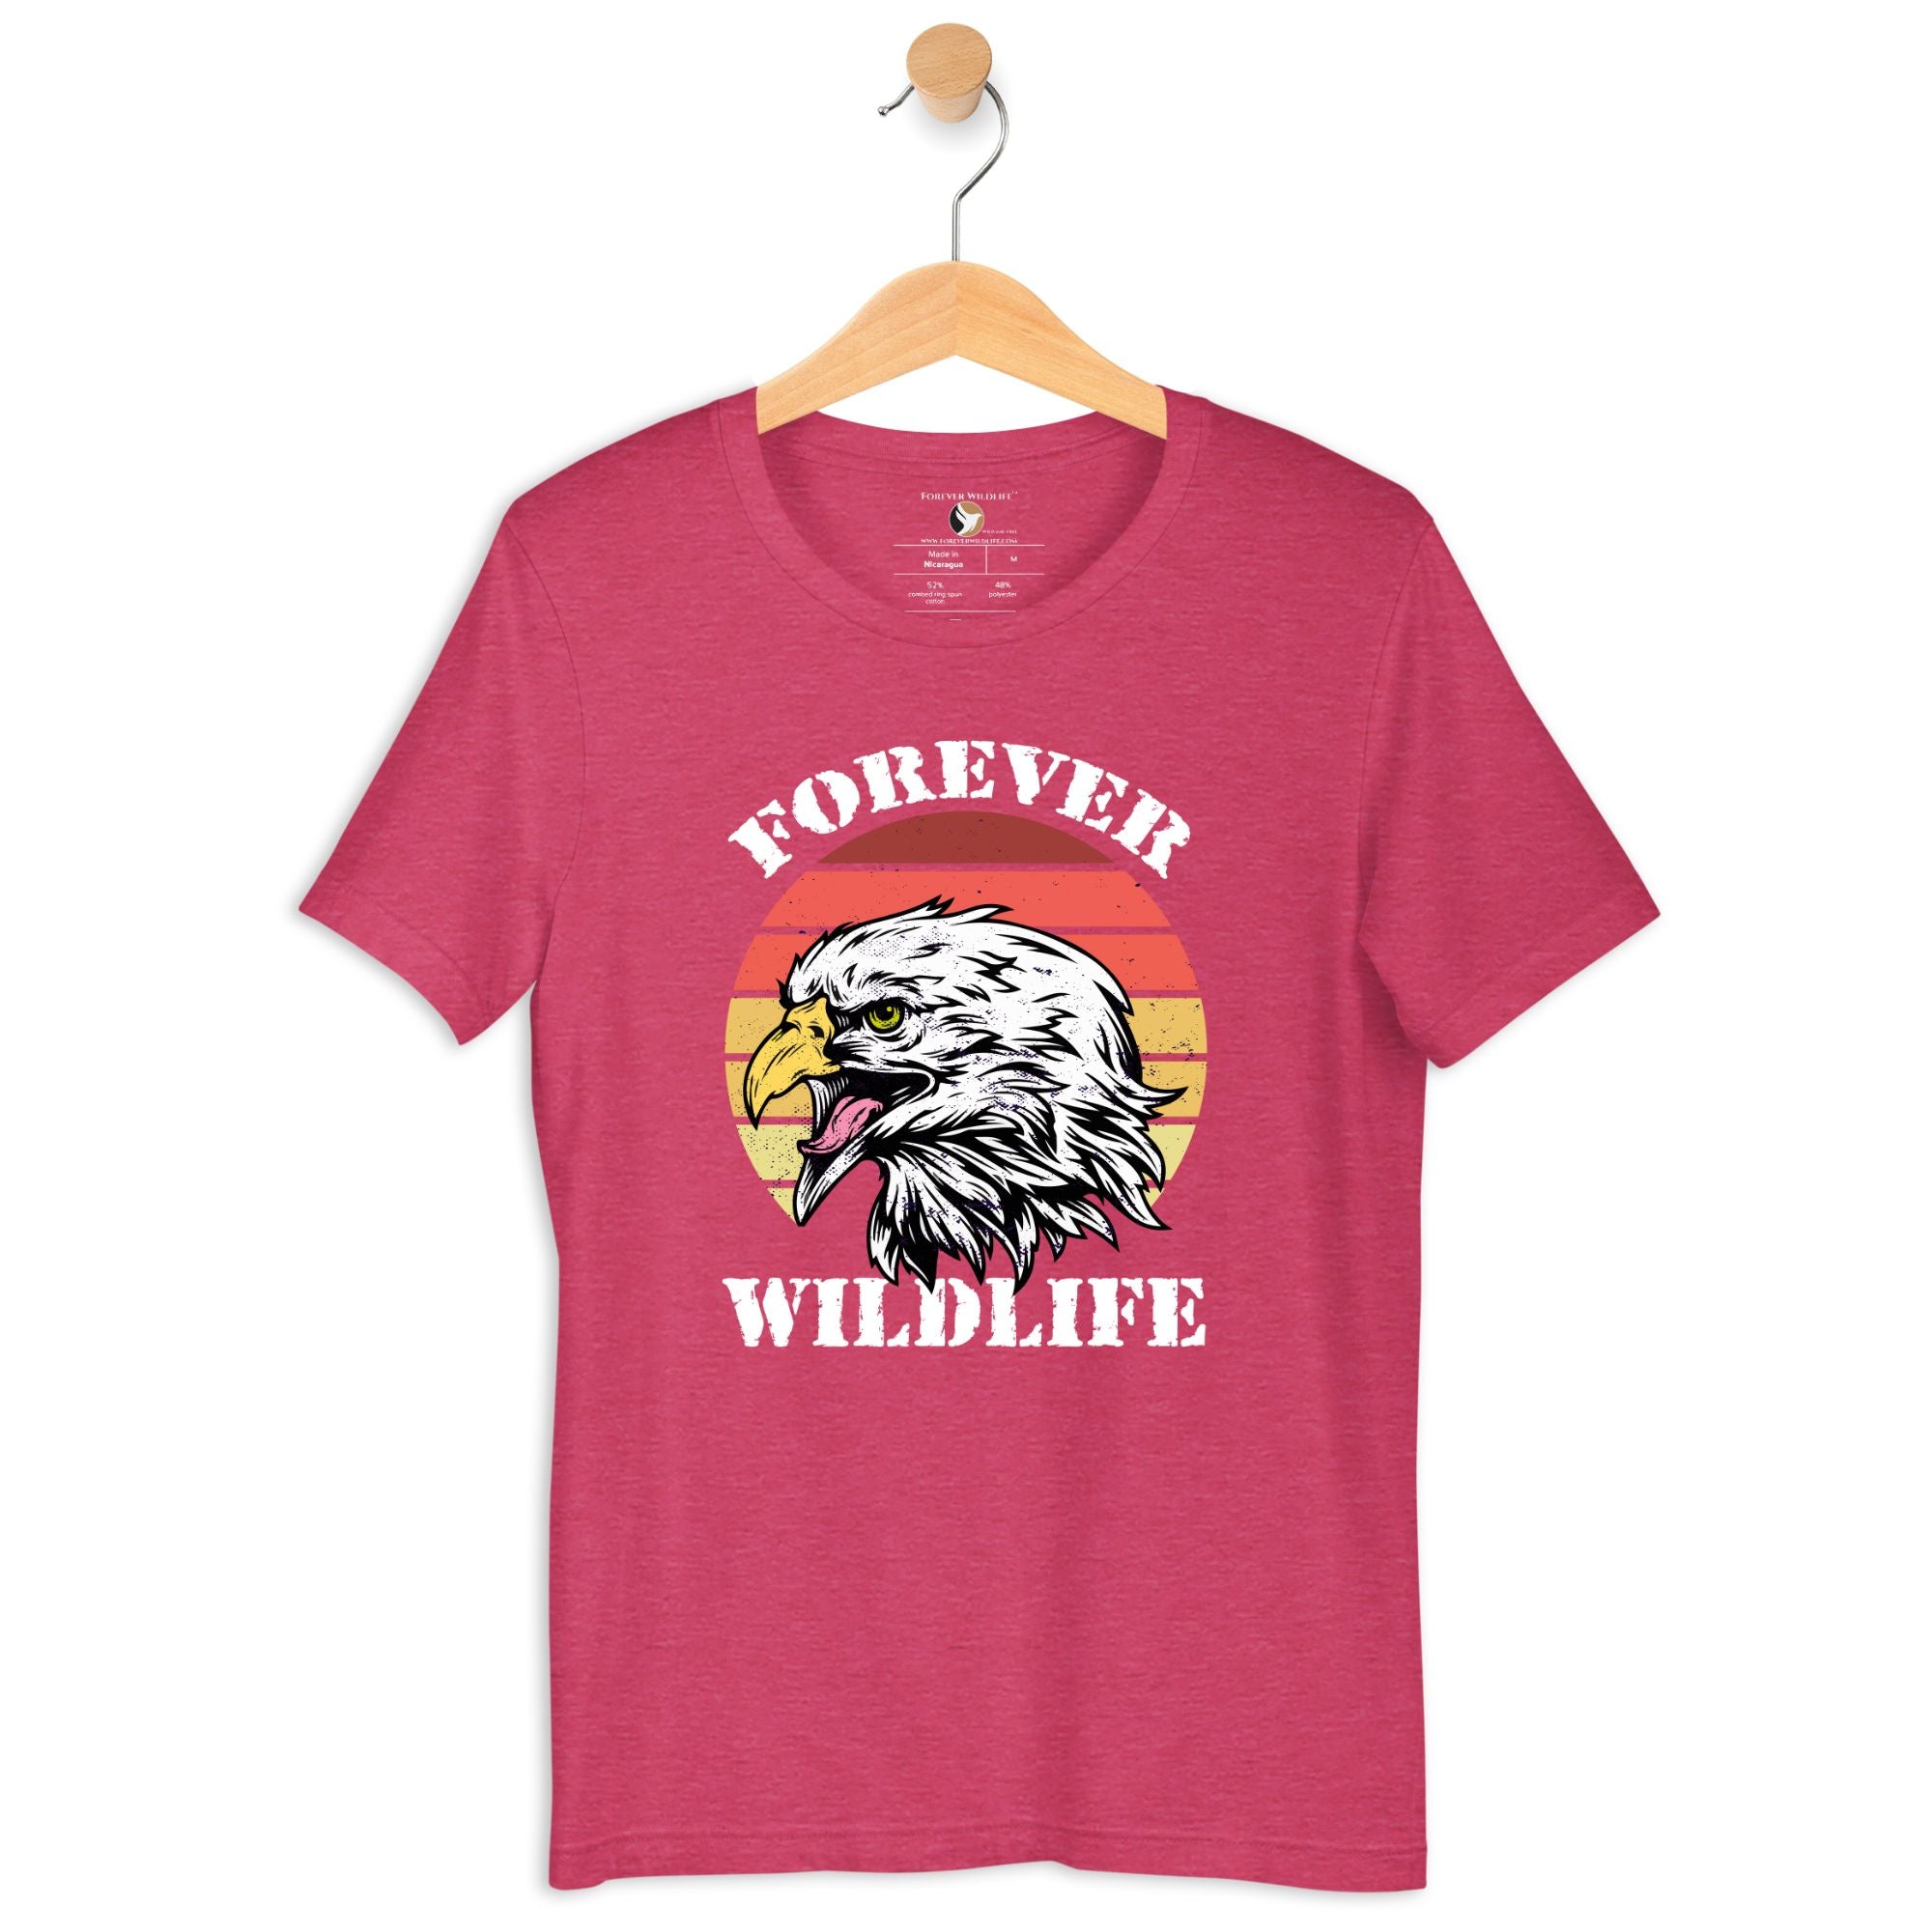 Eagle T-Shirt, Heather Tee in Raspberry – Premium Wildlife T-Shirt Design, Eagle Shirts and Wildlife Clothing from Forever Wildlife